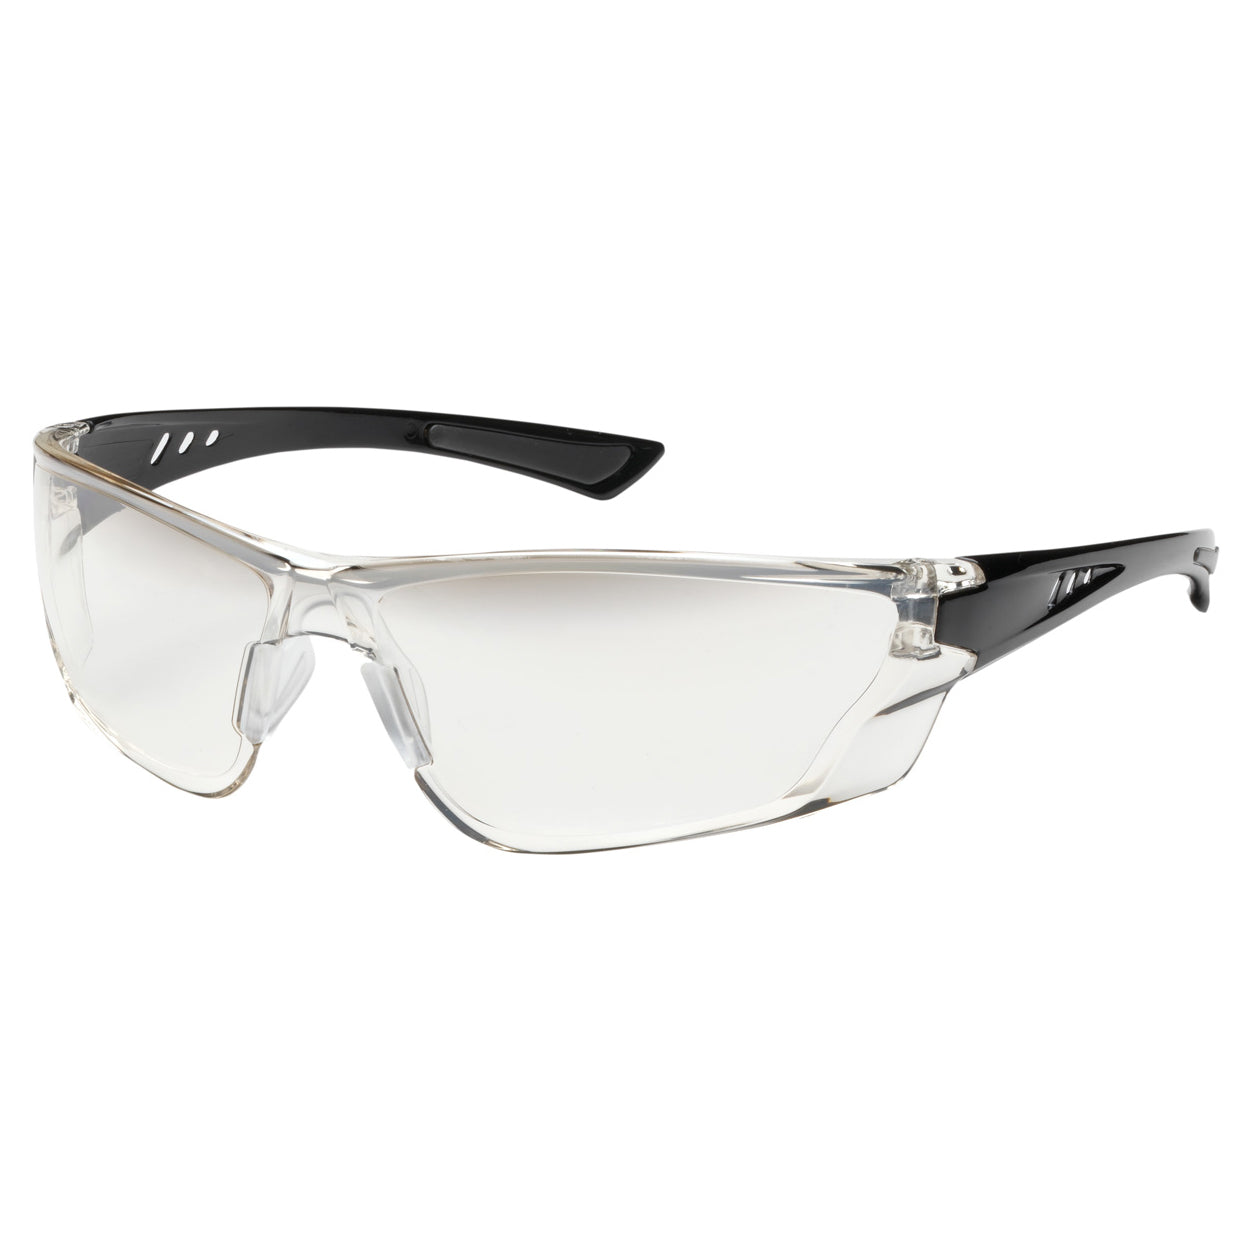 Bouton 250-32 Series Recon Safety Glasses-eSafety Supplies, Inc